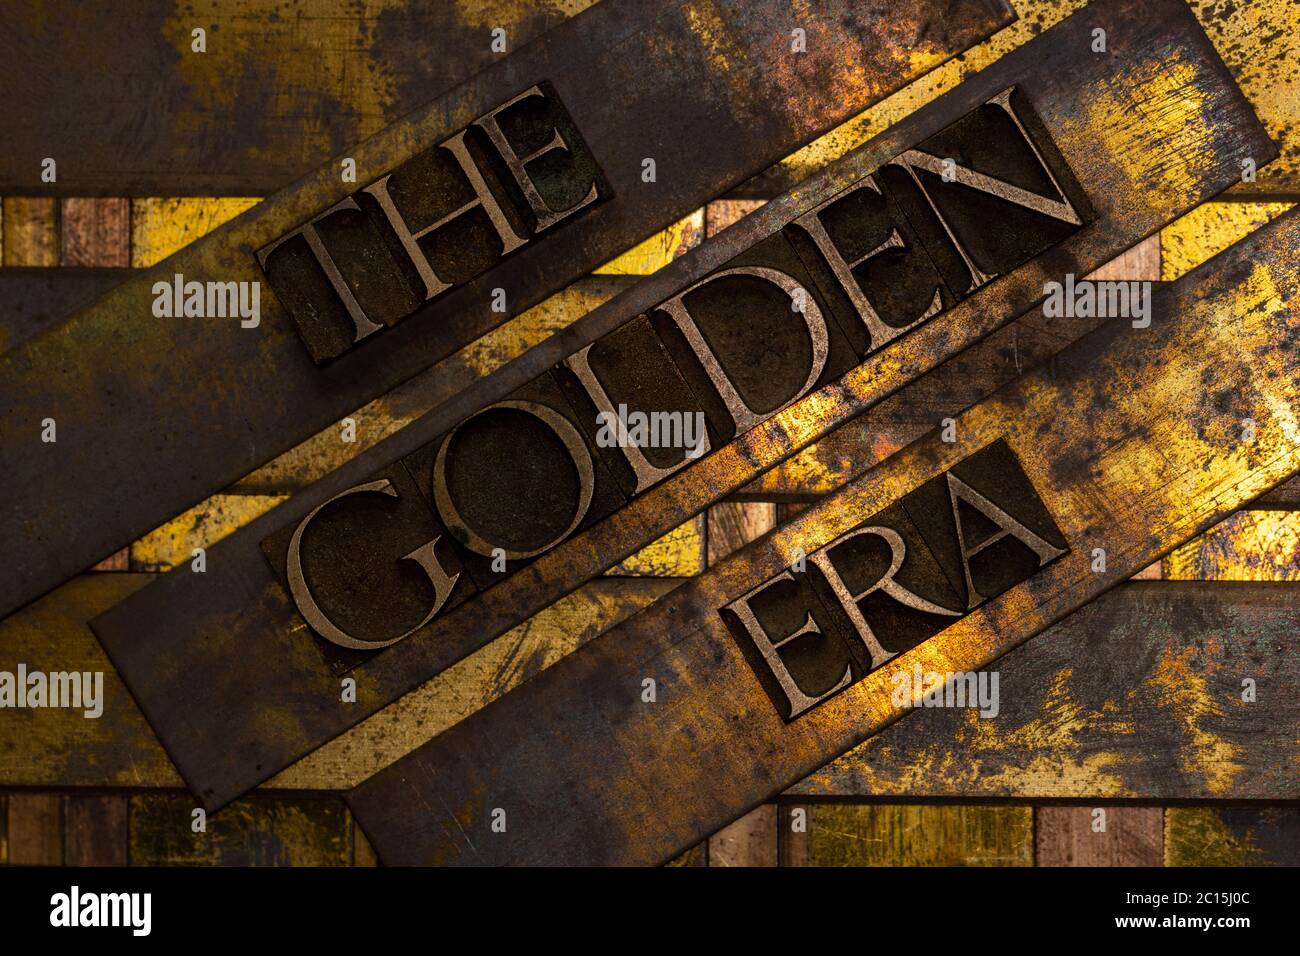 The Golden Era text formed with real authentic typeset letters on vintage textured silver grunge copper and gold background Stock Photo